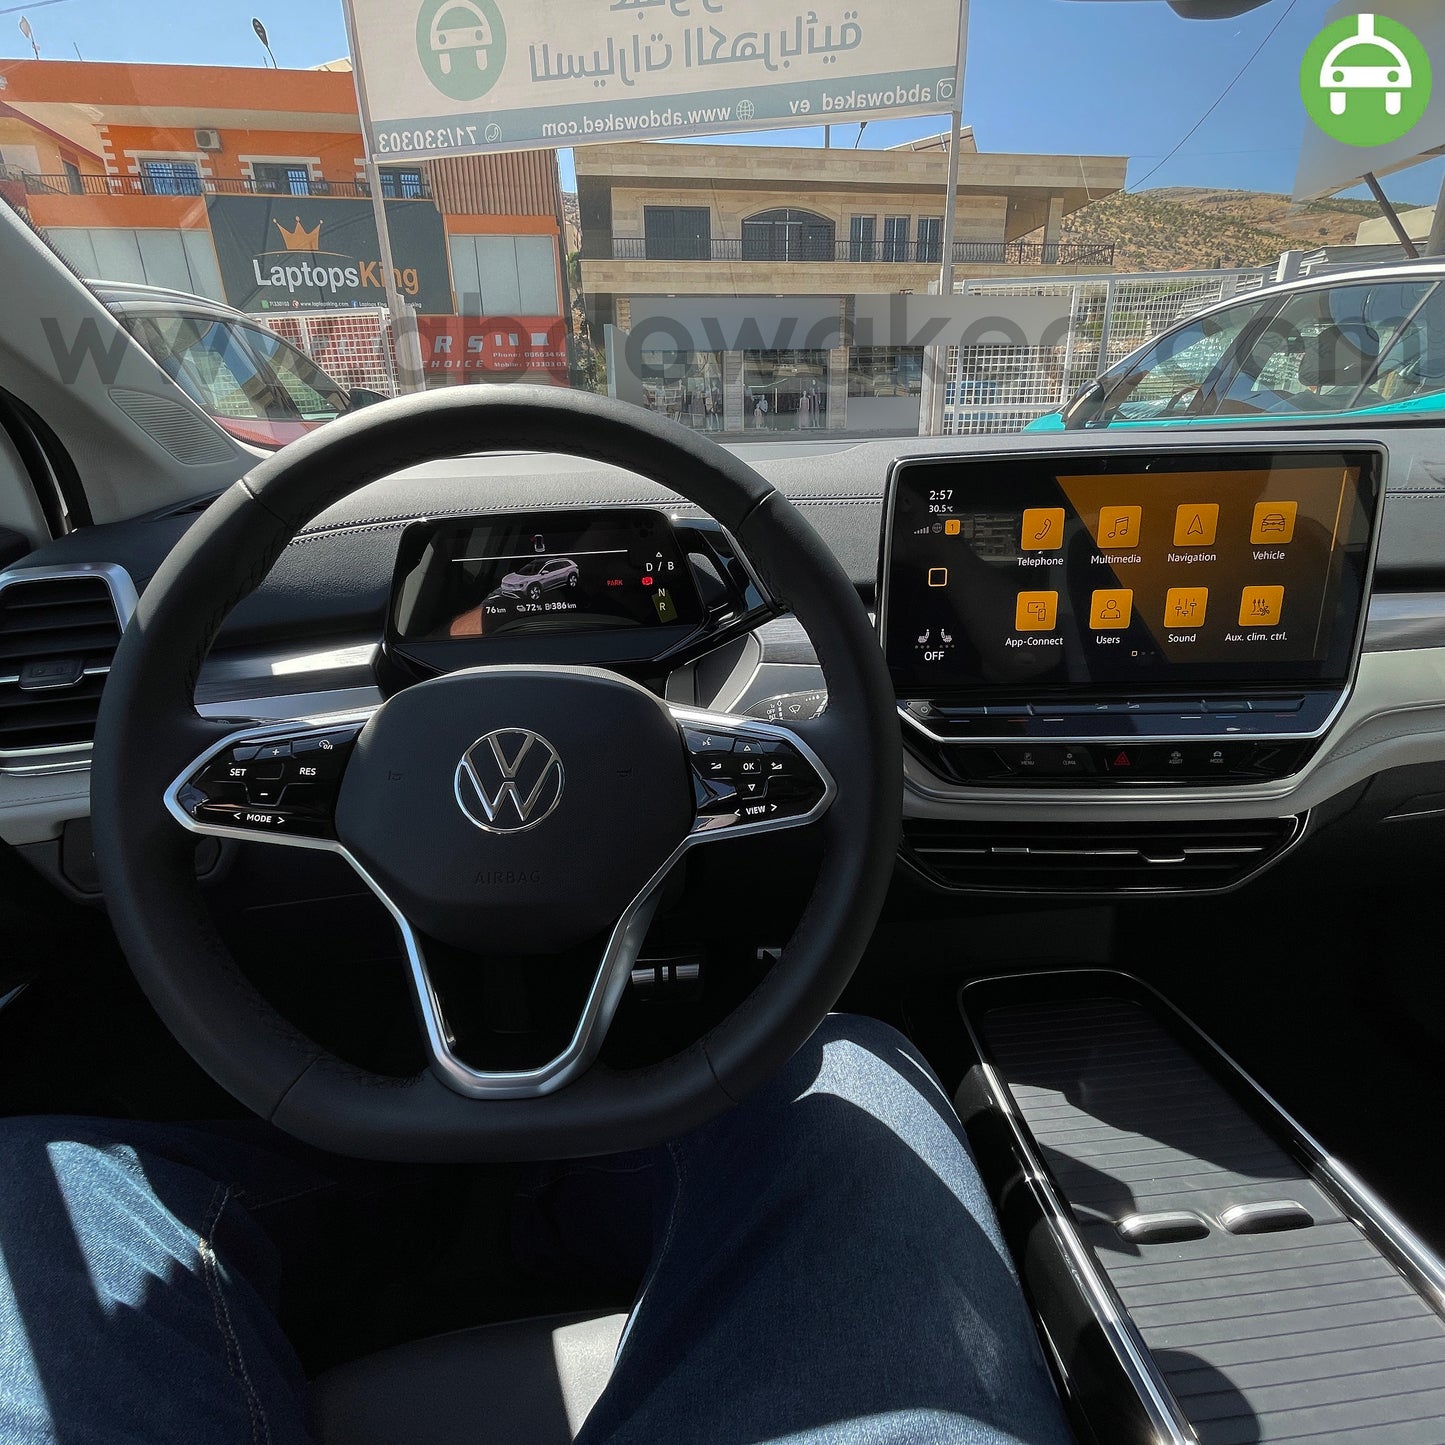 VW ID6 Crozz Pure+ 2022 7-Seater Dark Blue Color 550km Range/Charge Fully Electric Car (New - 0KM)